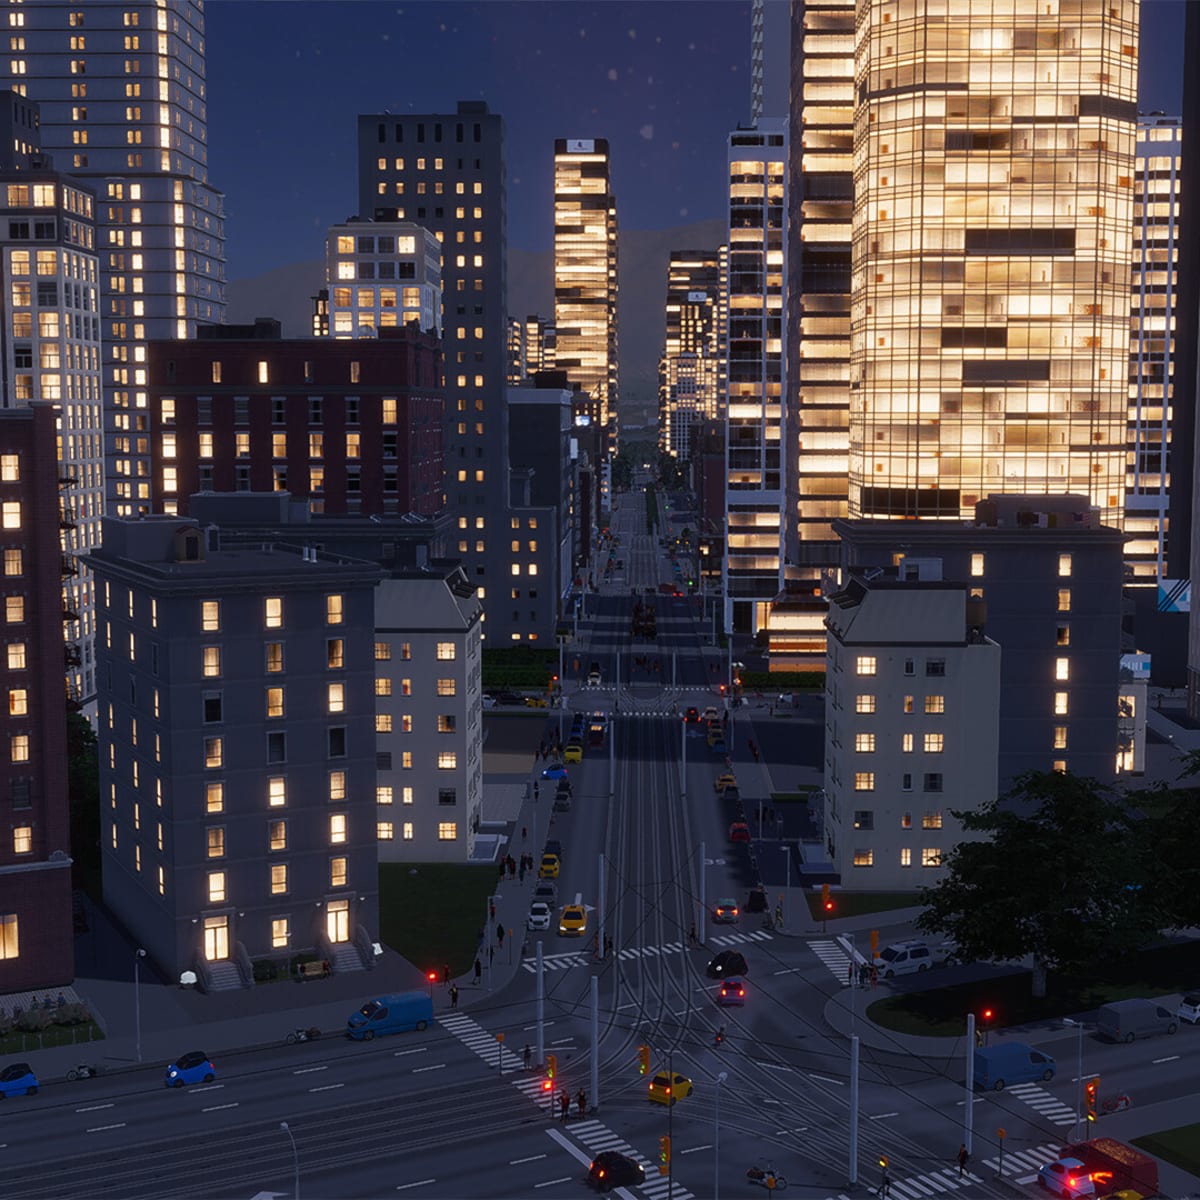 No, Cities: Skylines 2's wonky performance isn't because it's